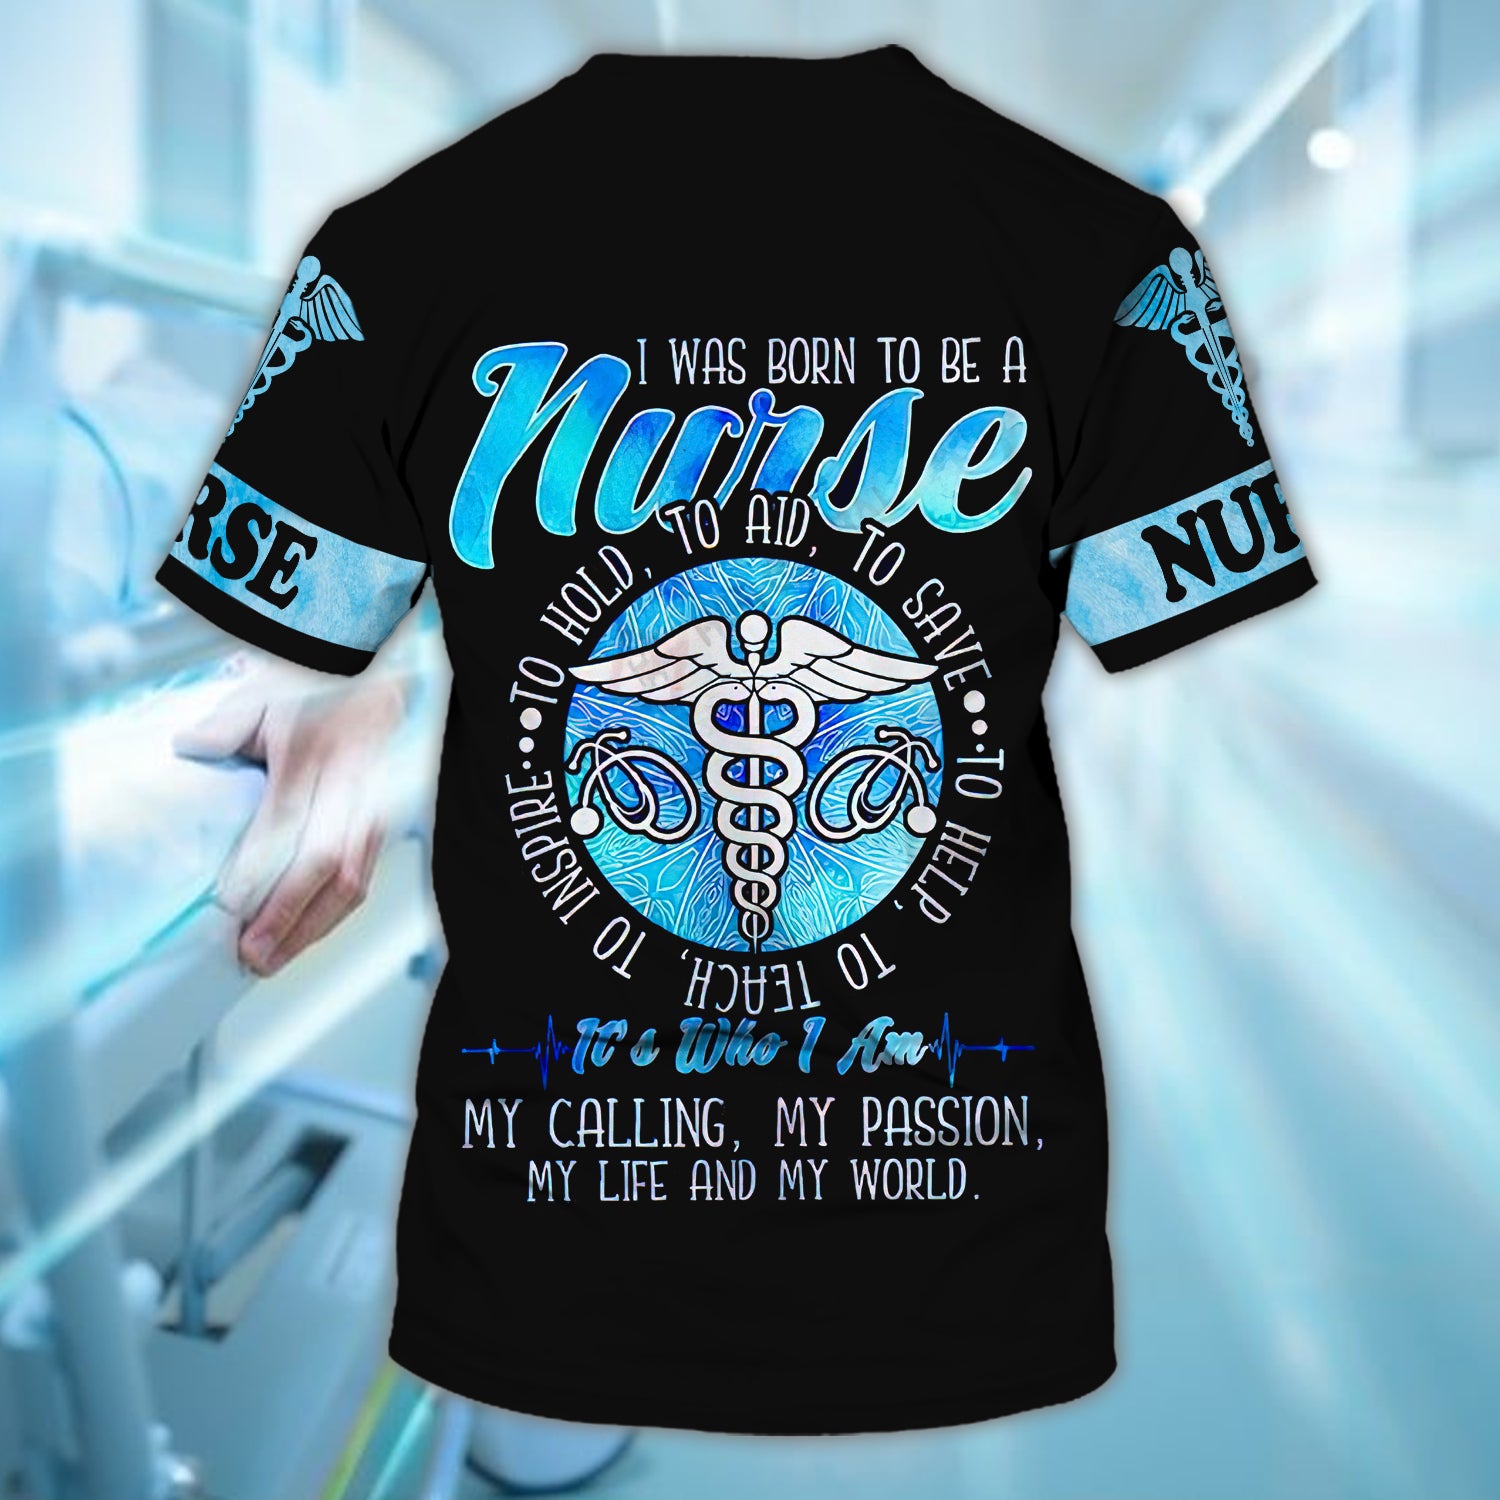 To be a Nurse- Personalized Name 3D Tshirt - HN95